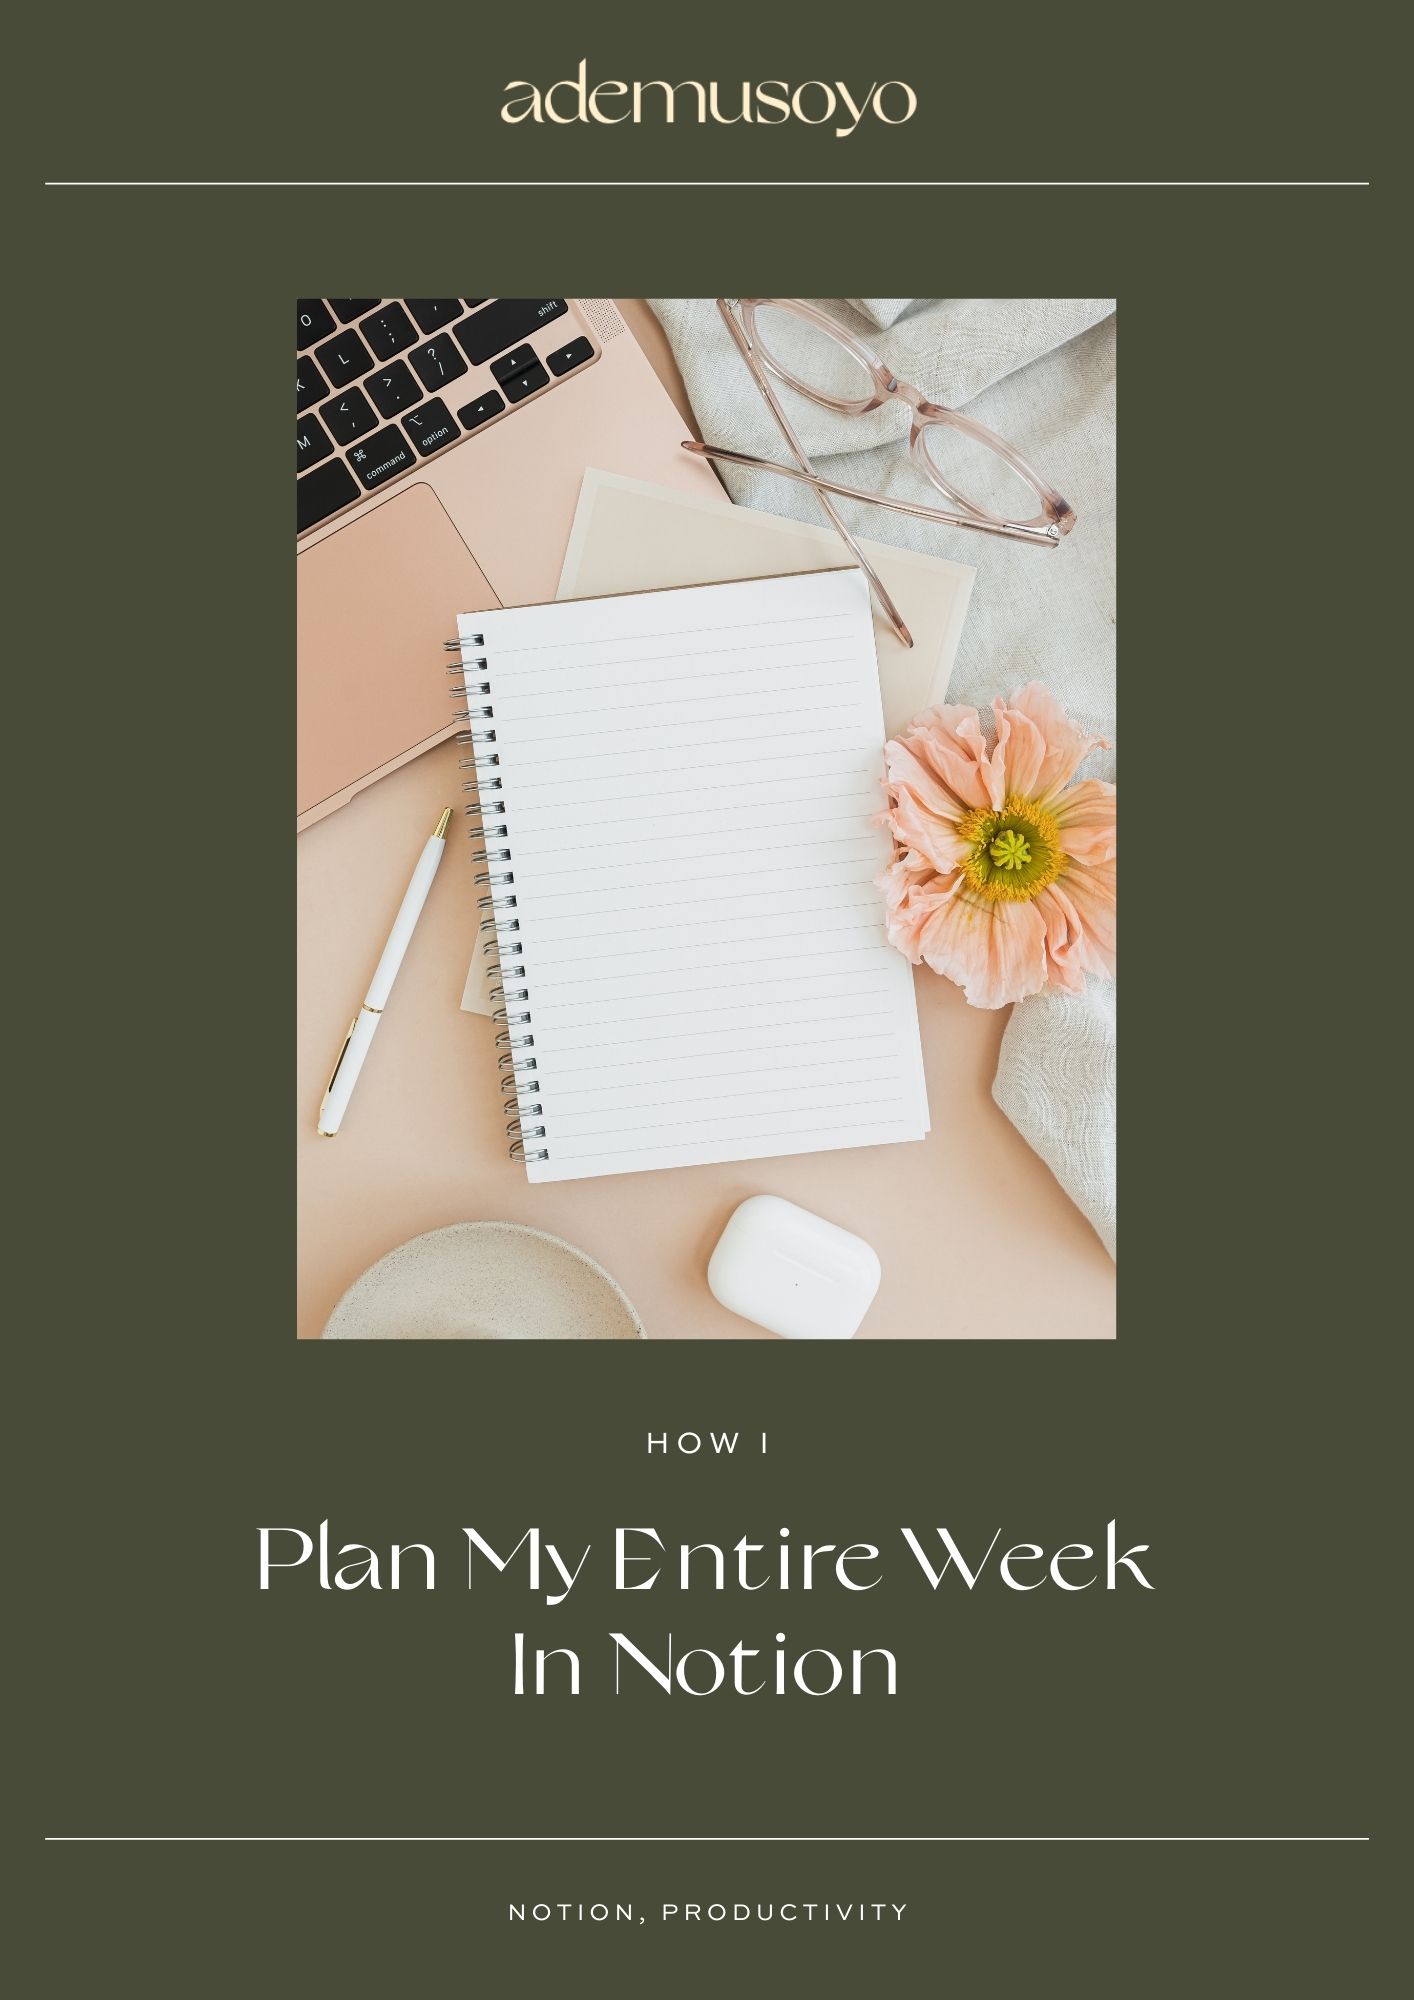 Effortlessly plan your entire week in Notion. Discover my Notion weekly planning routine to boost your productivity & improve time management skills.